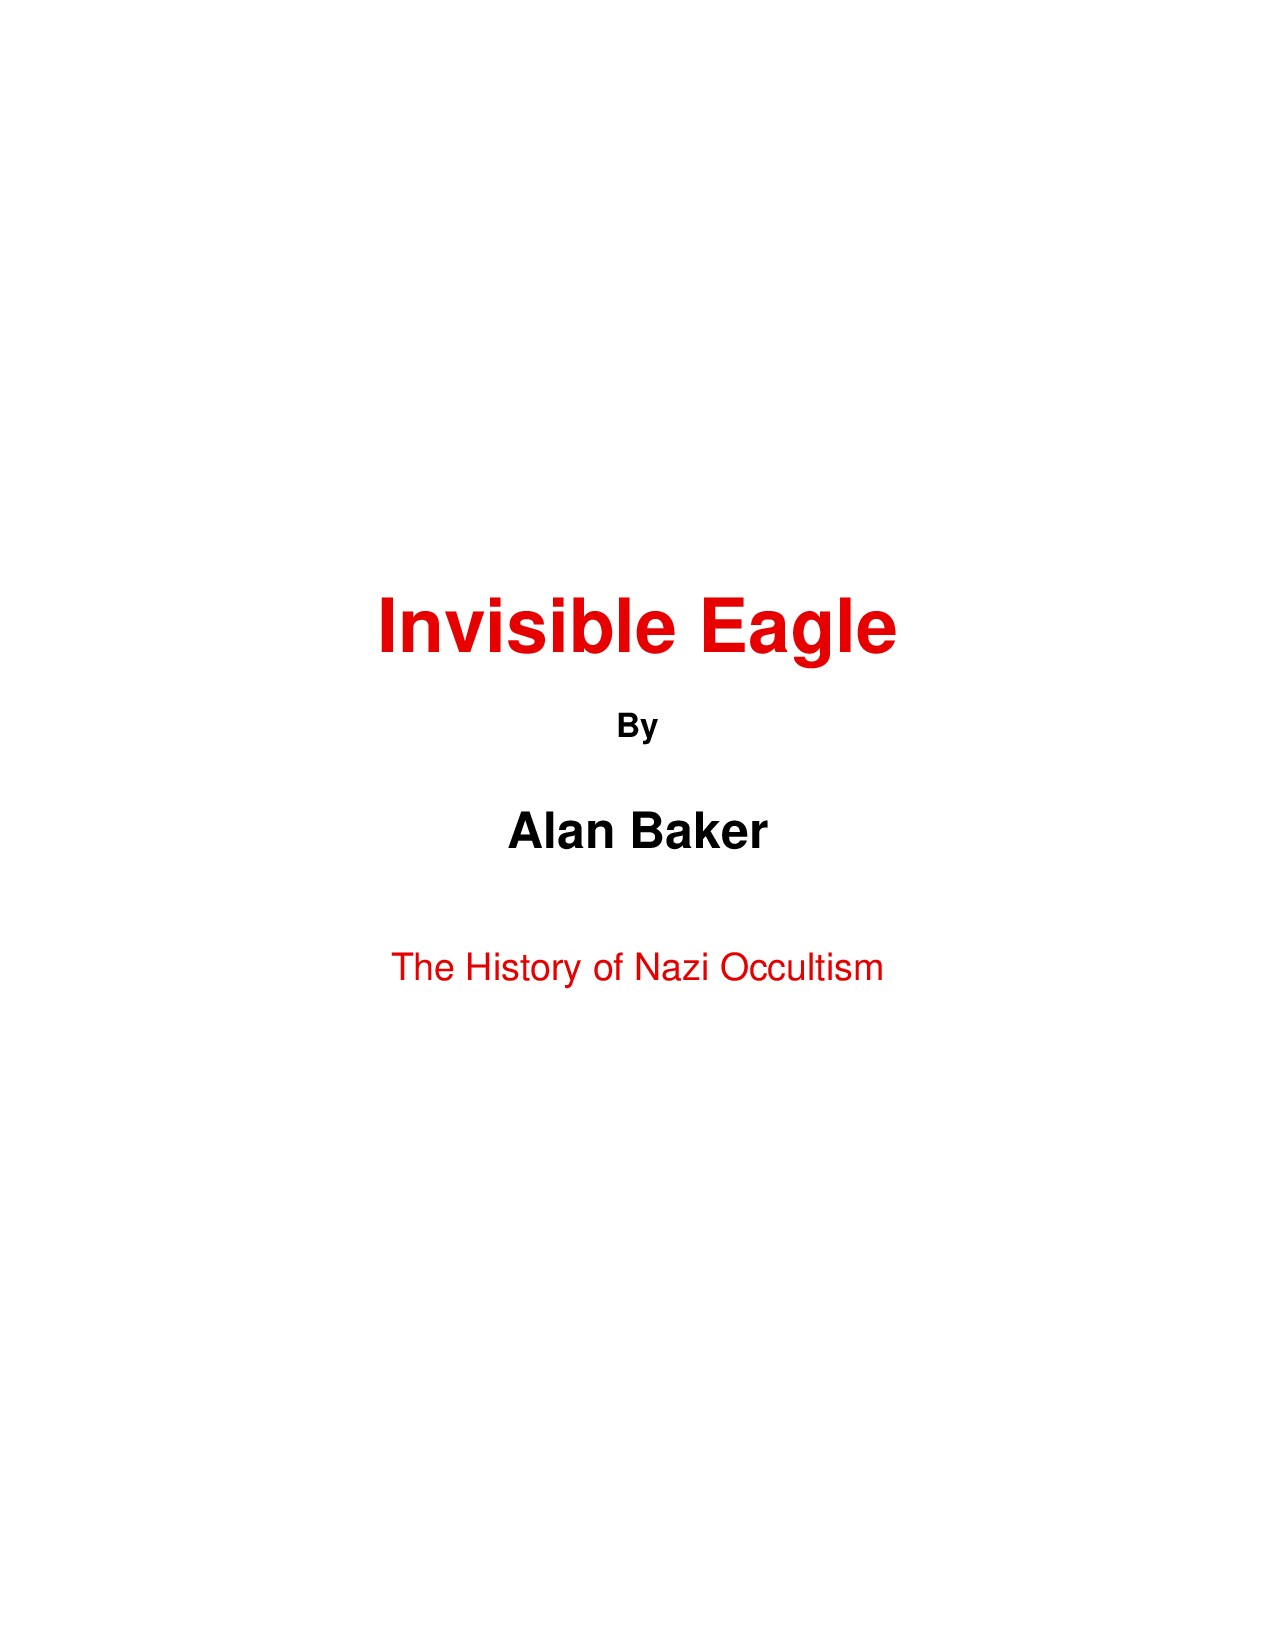 Invisible Eagle, The History of Nazi Occultism